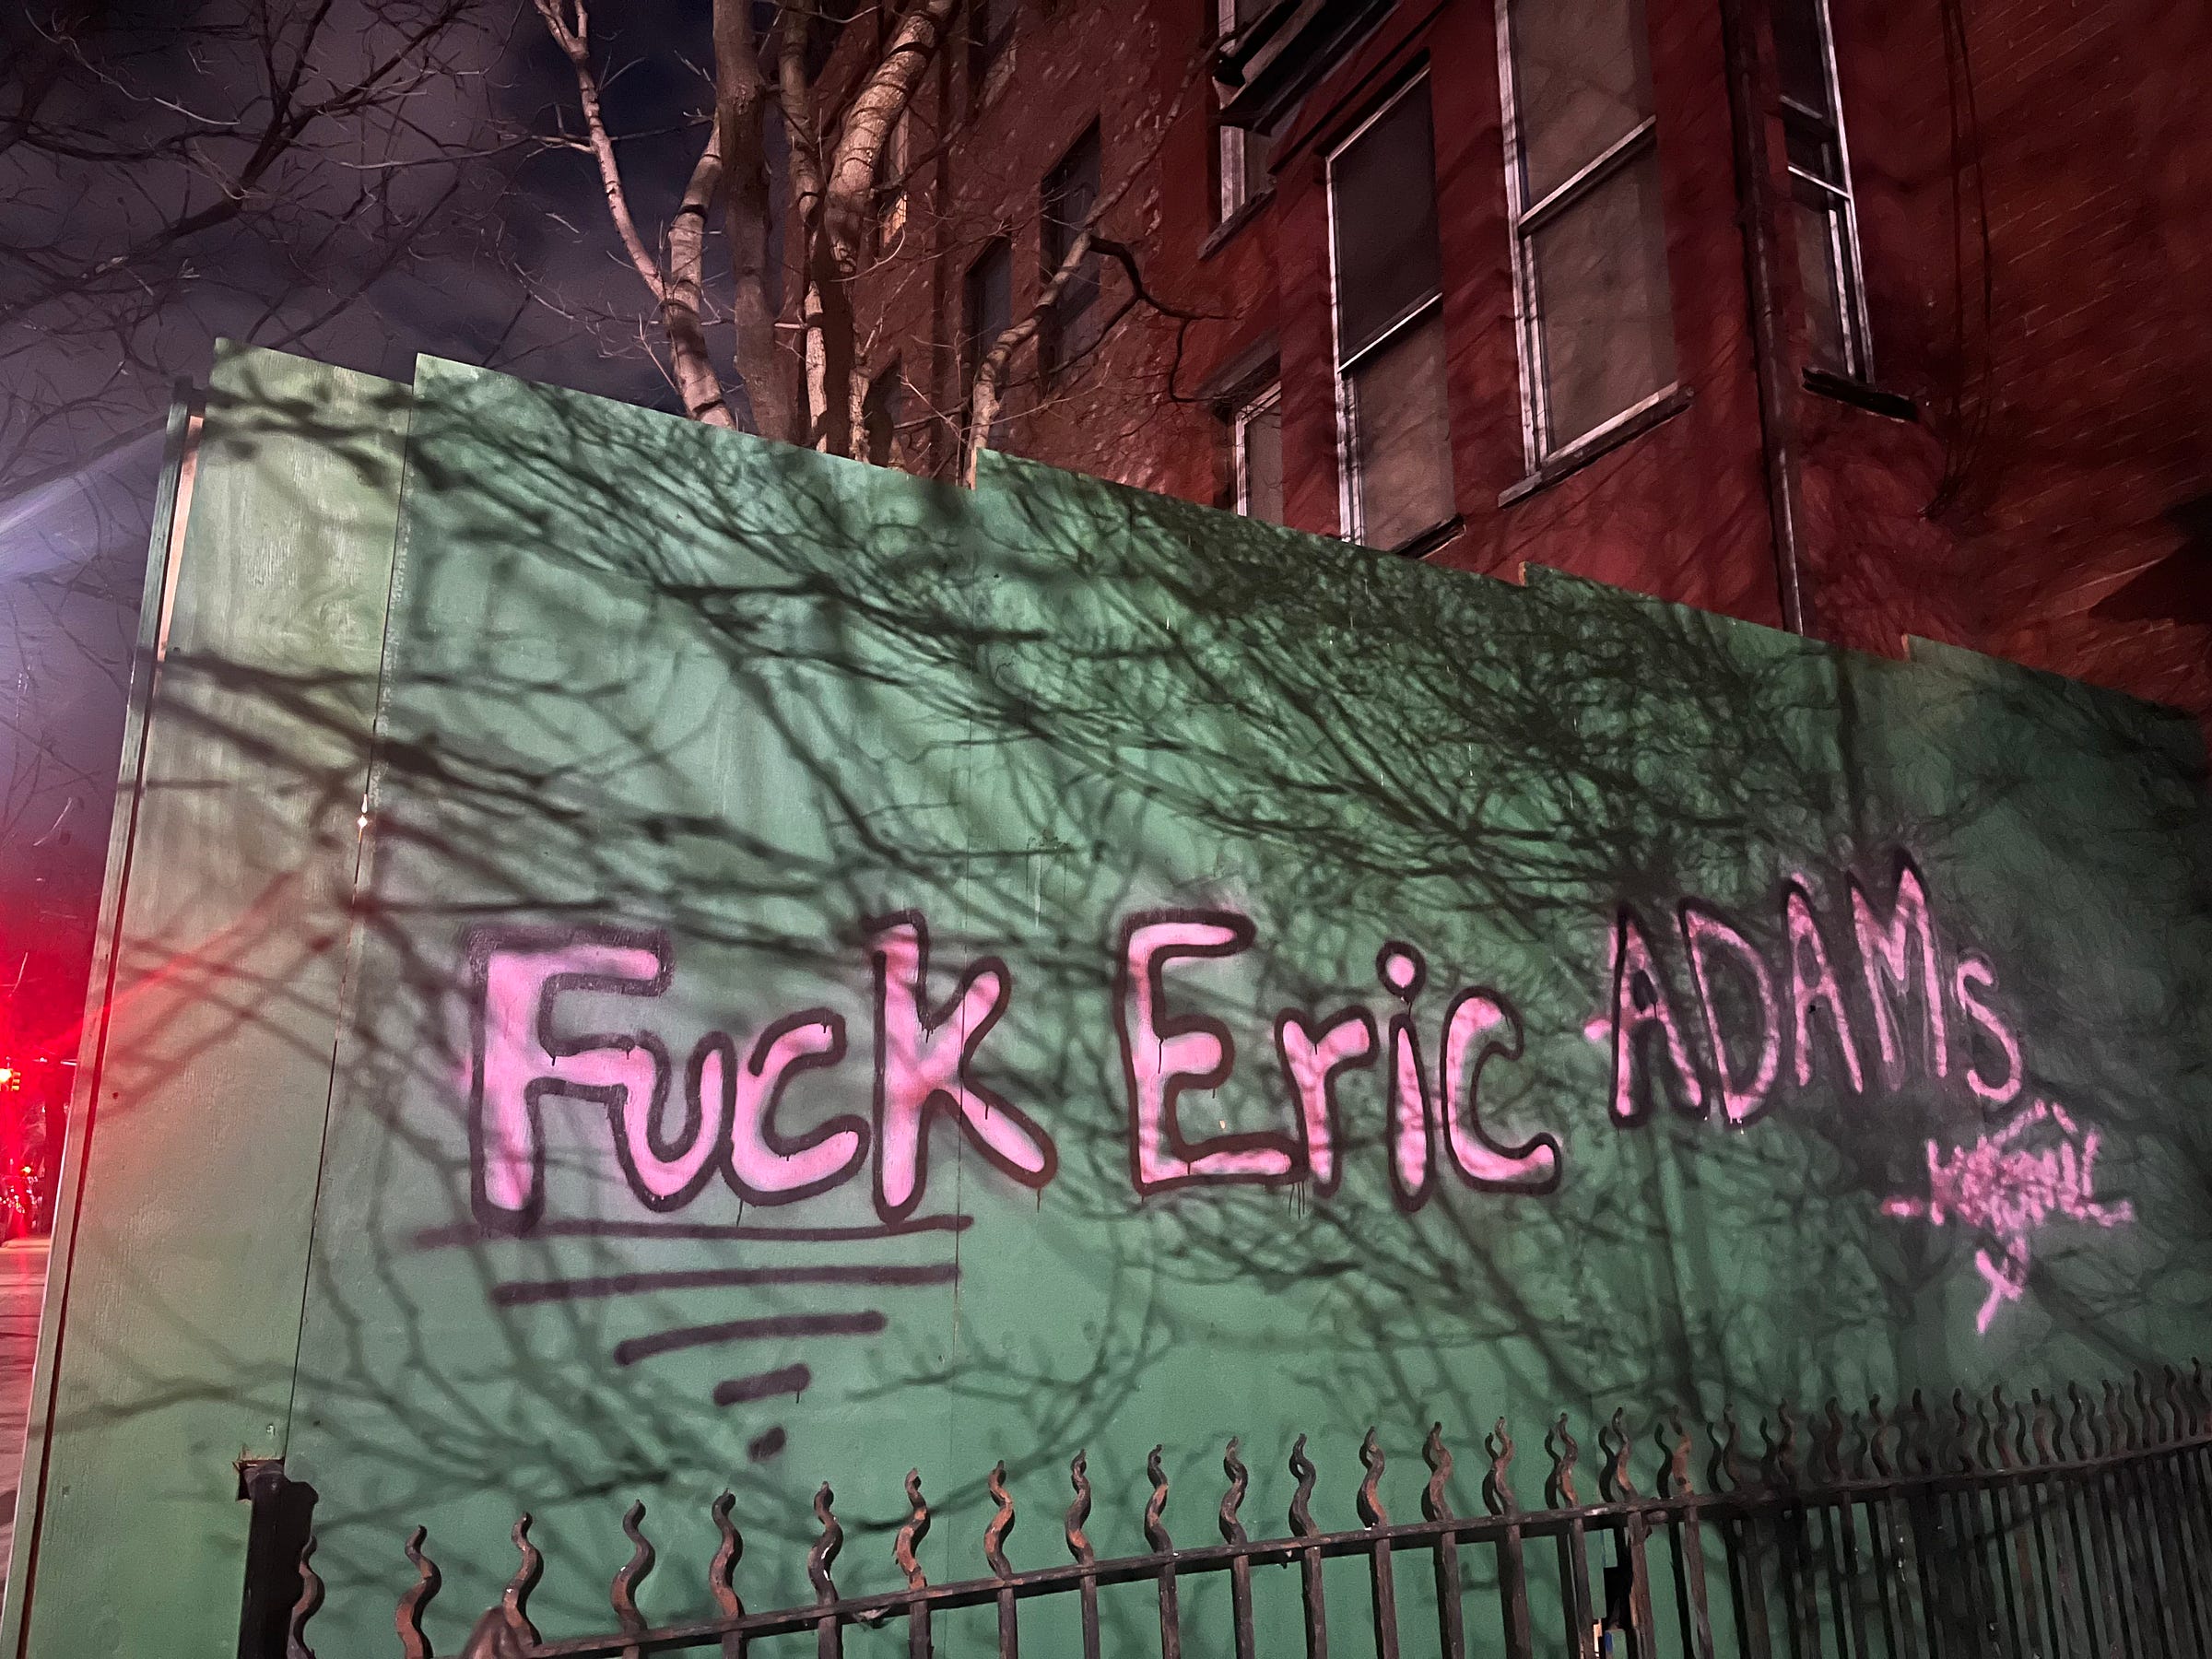 At night, on some green temporary construction walling outside, are the words "FUCK ERIC ADAMS" spray painted in pink with black outlines